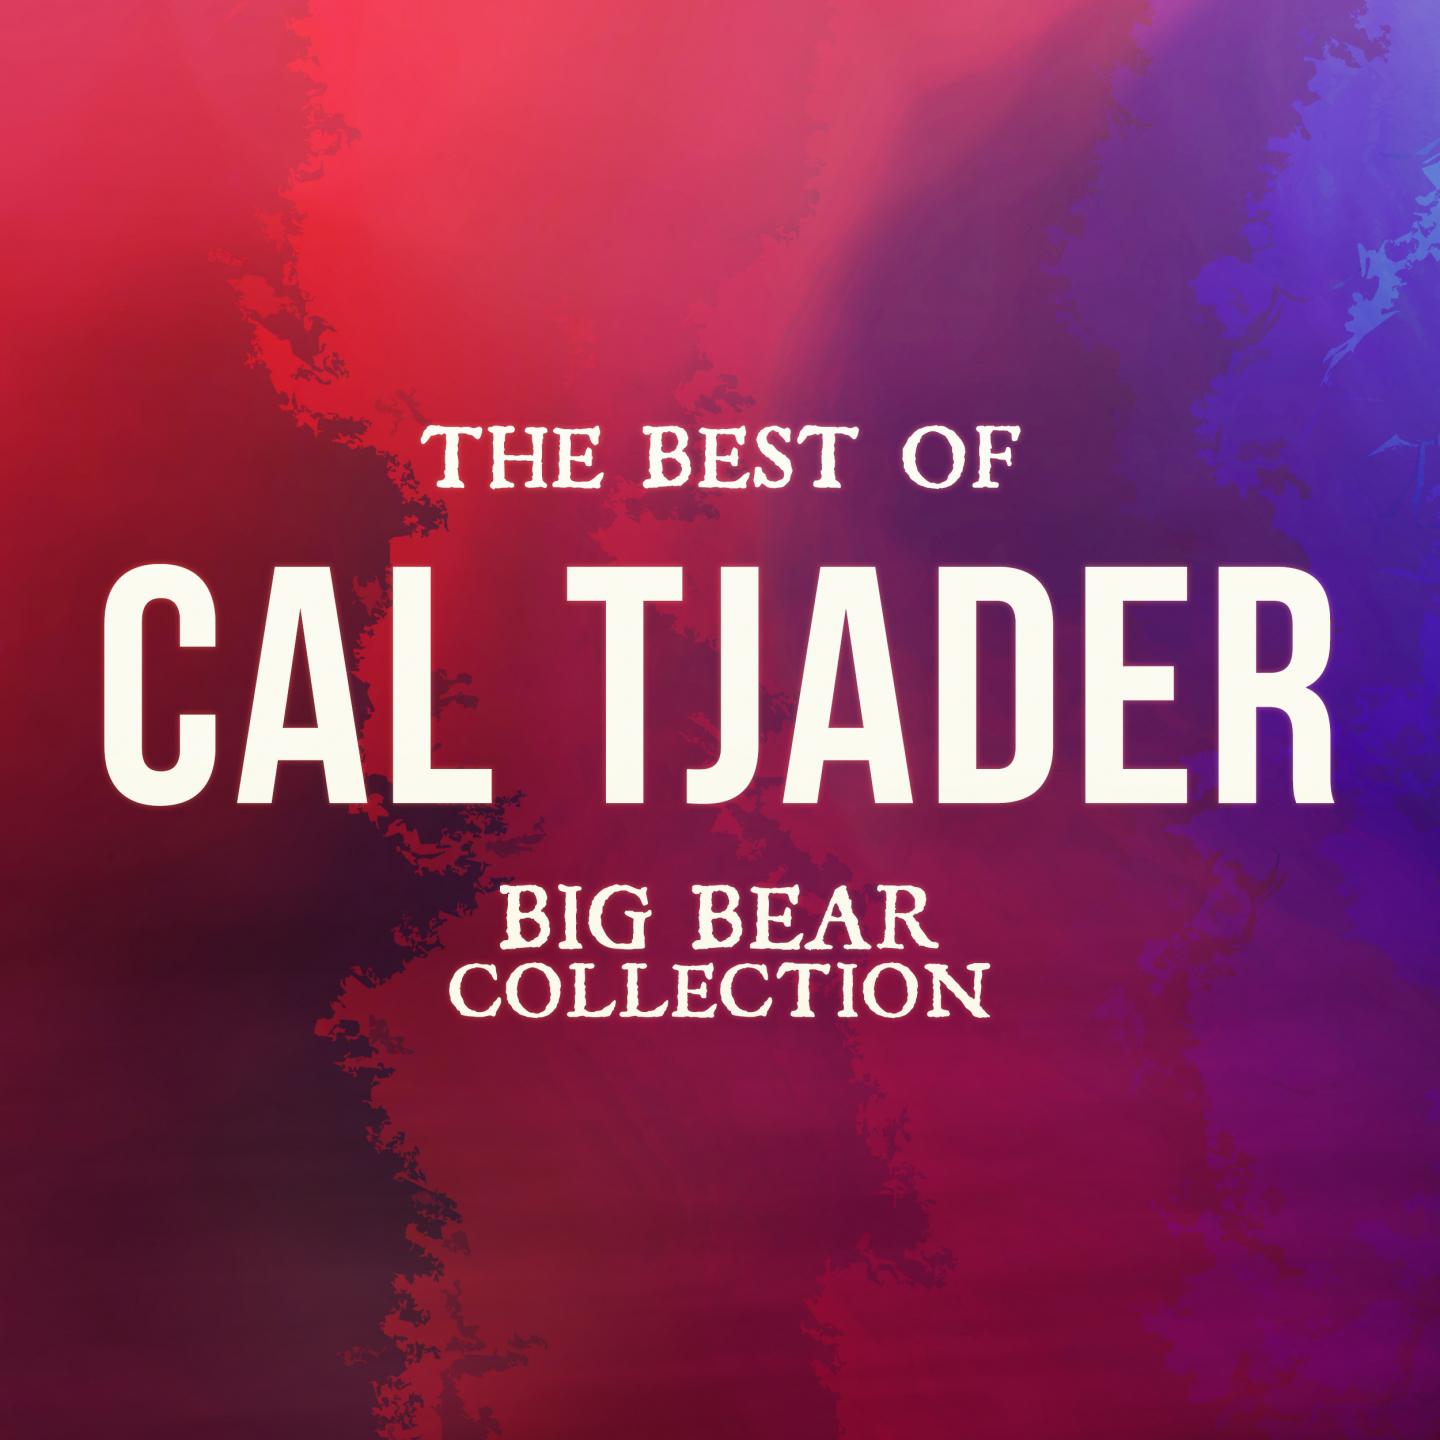 The Best of Cal Tjader (Big Bear Collection)